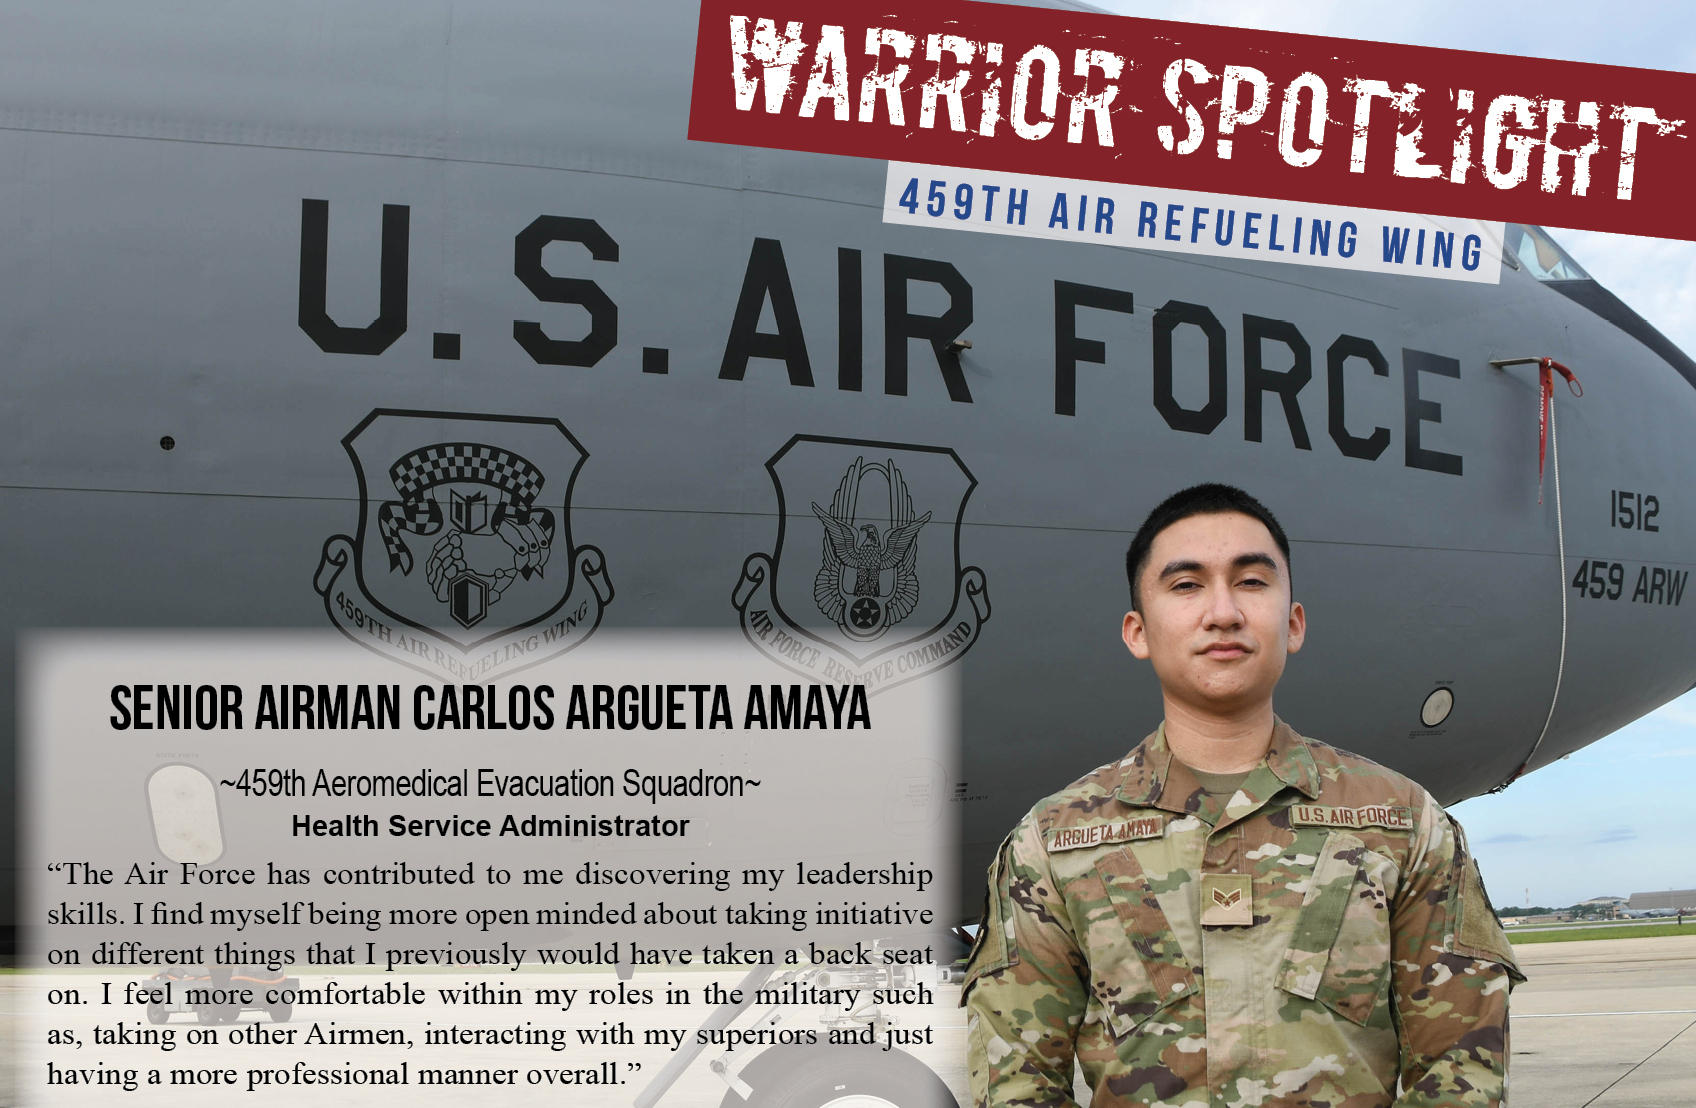 Warrior Spotlight: Senior Airman Carlos Argueta Amaya, 459th Aeromedical Evacuation Squadron "The Air Force has contributed to me discovering my leadership skills. I find myself being more open minded about taking initiative on different things that I previously would have taken a back seat on. I feel more comfortable within my roles in the military, such as taking on other Airmen, interacting with my superiors, and just having a more professional manner overall."